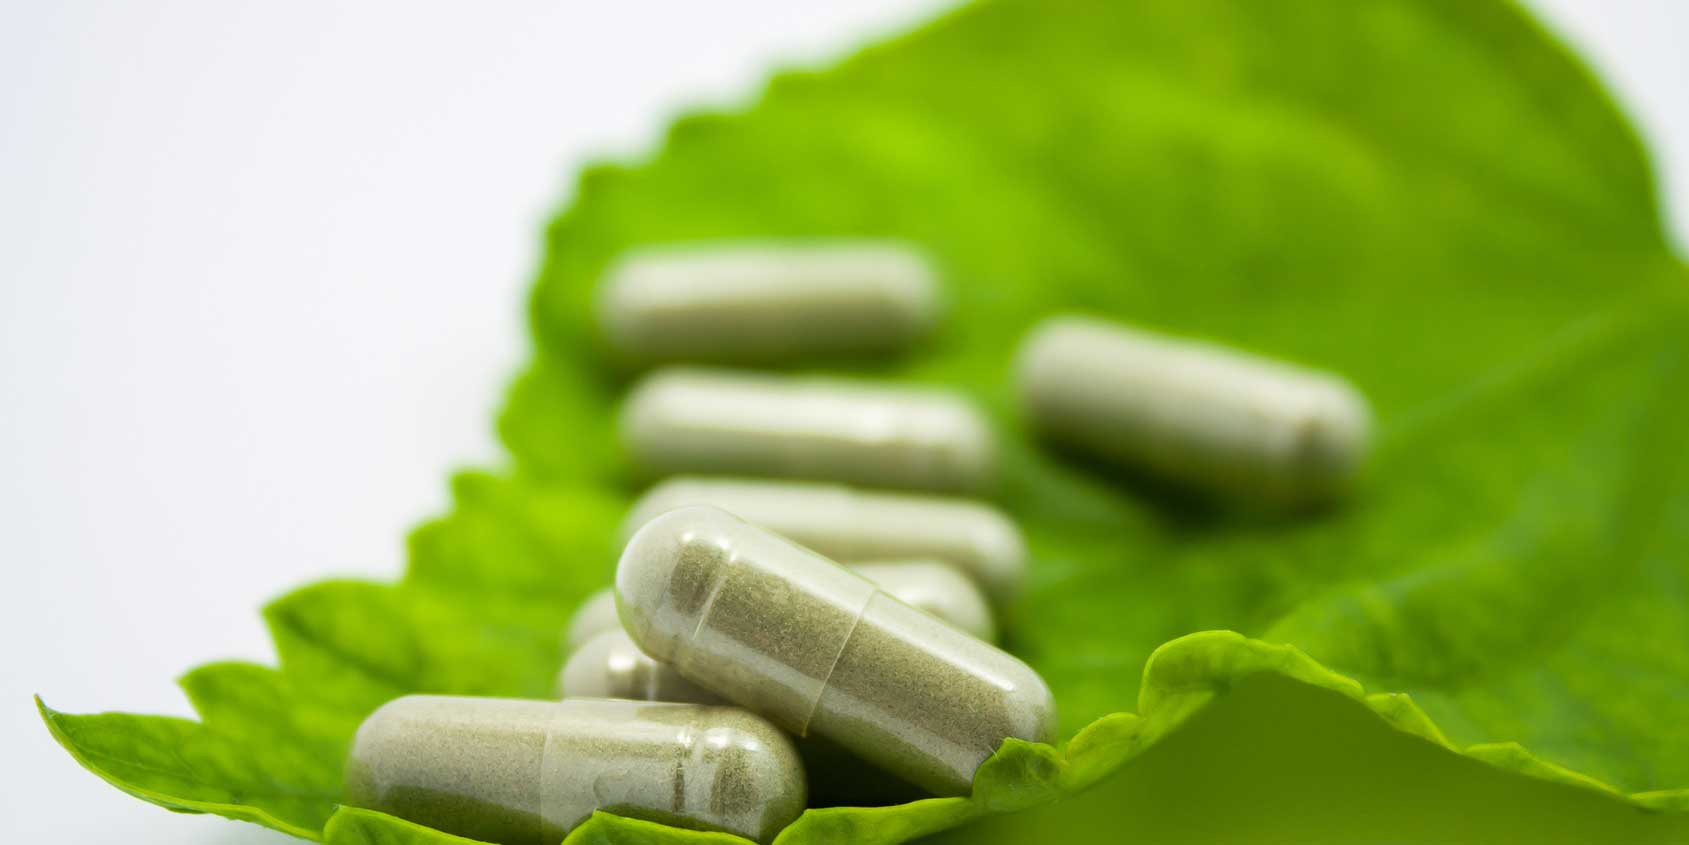 Is This the Beginning of the End for Quality Supplements?